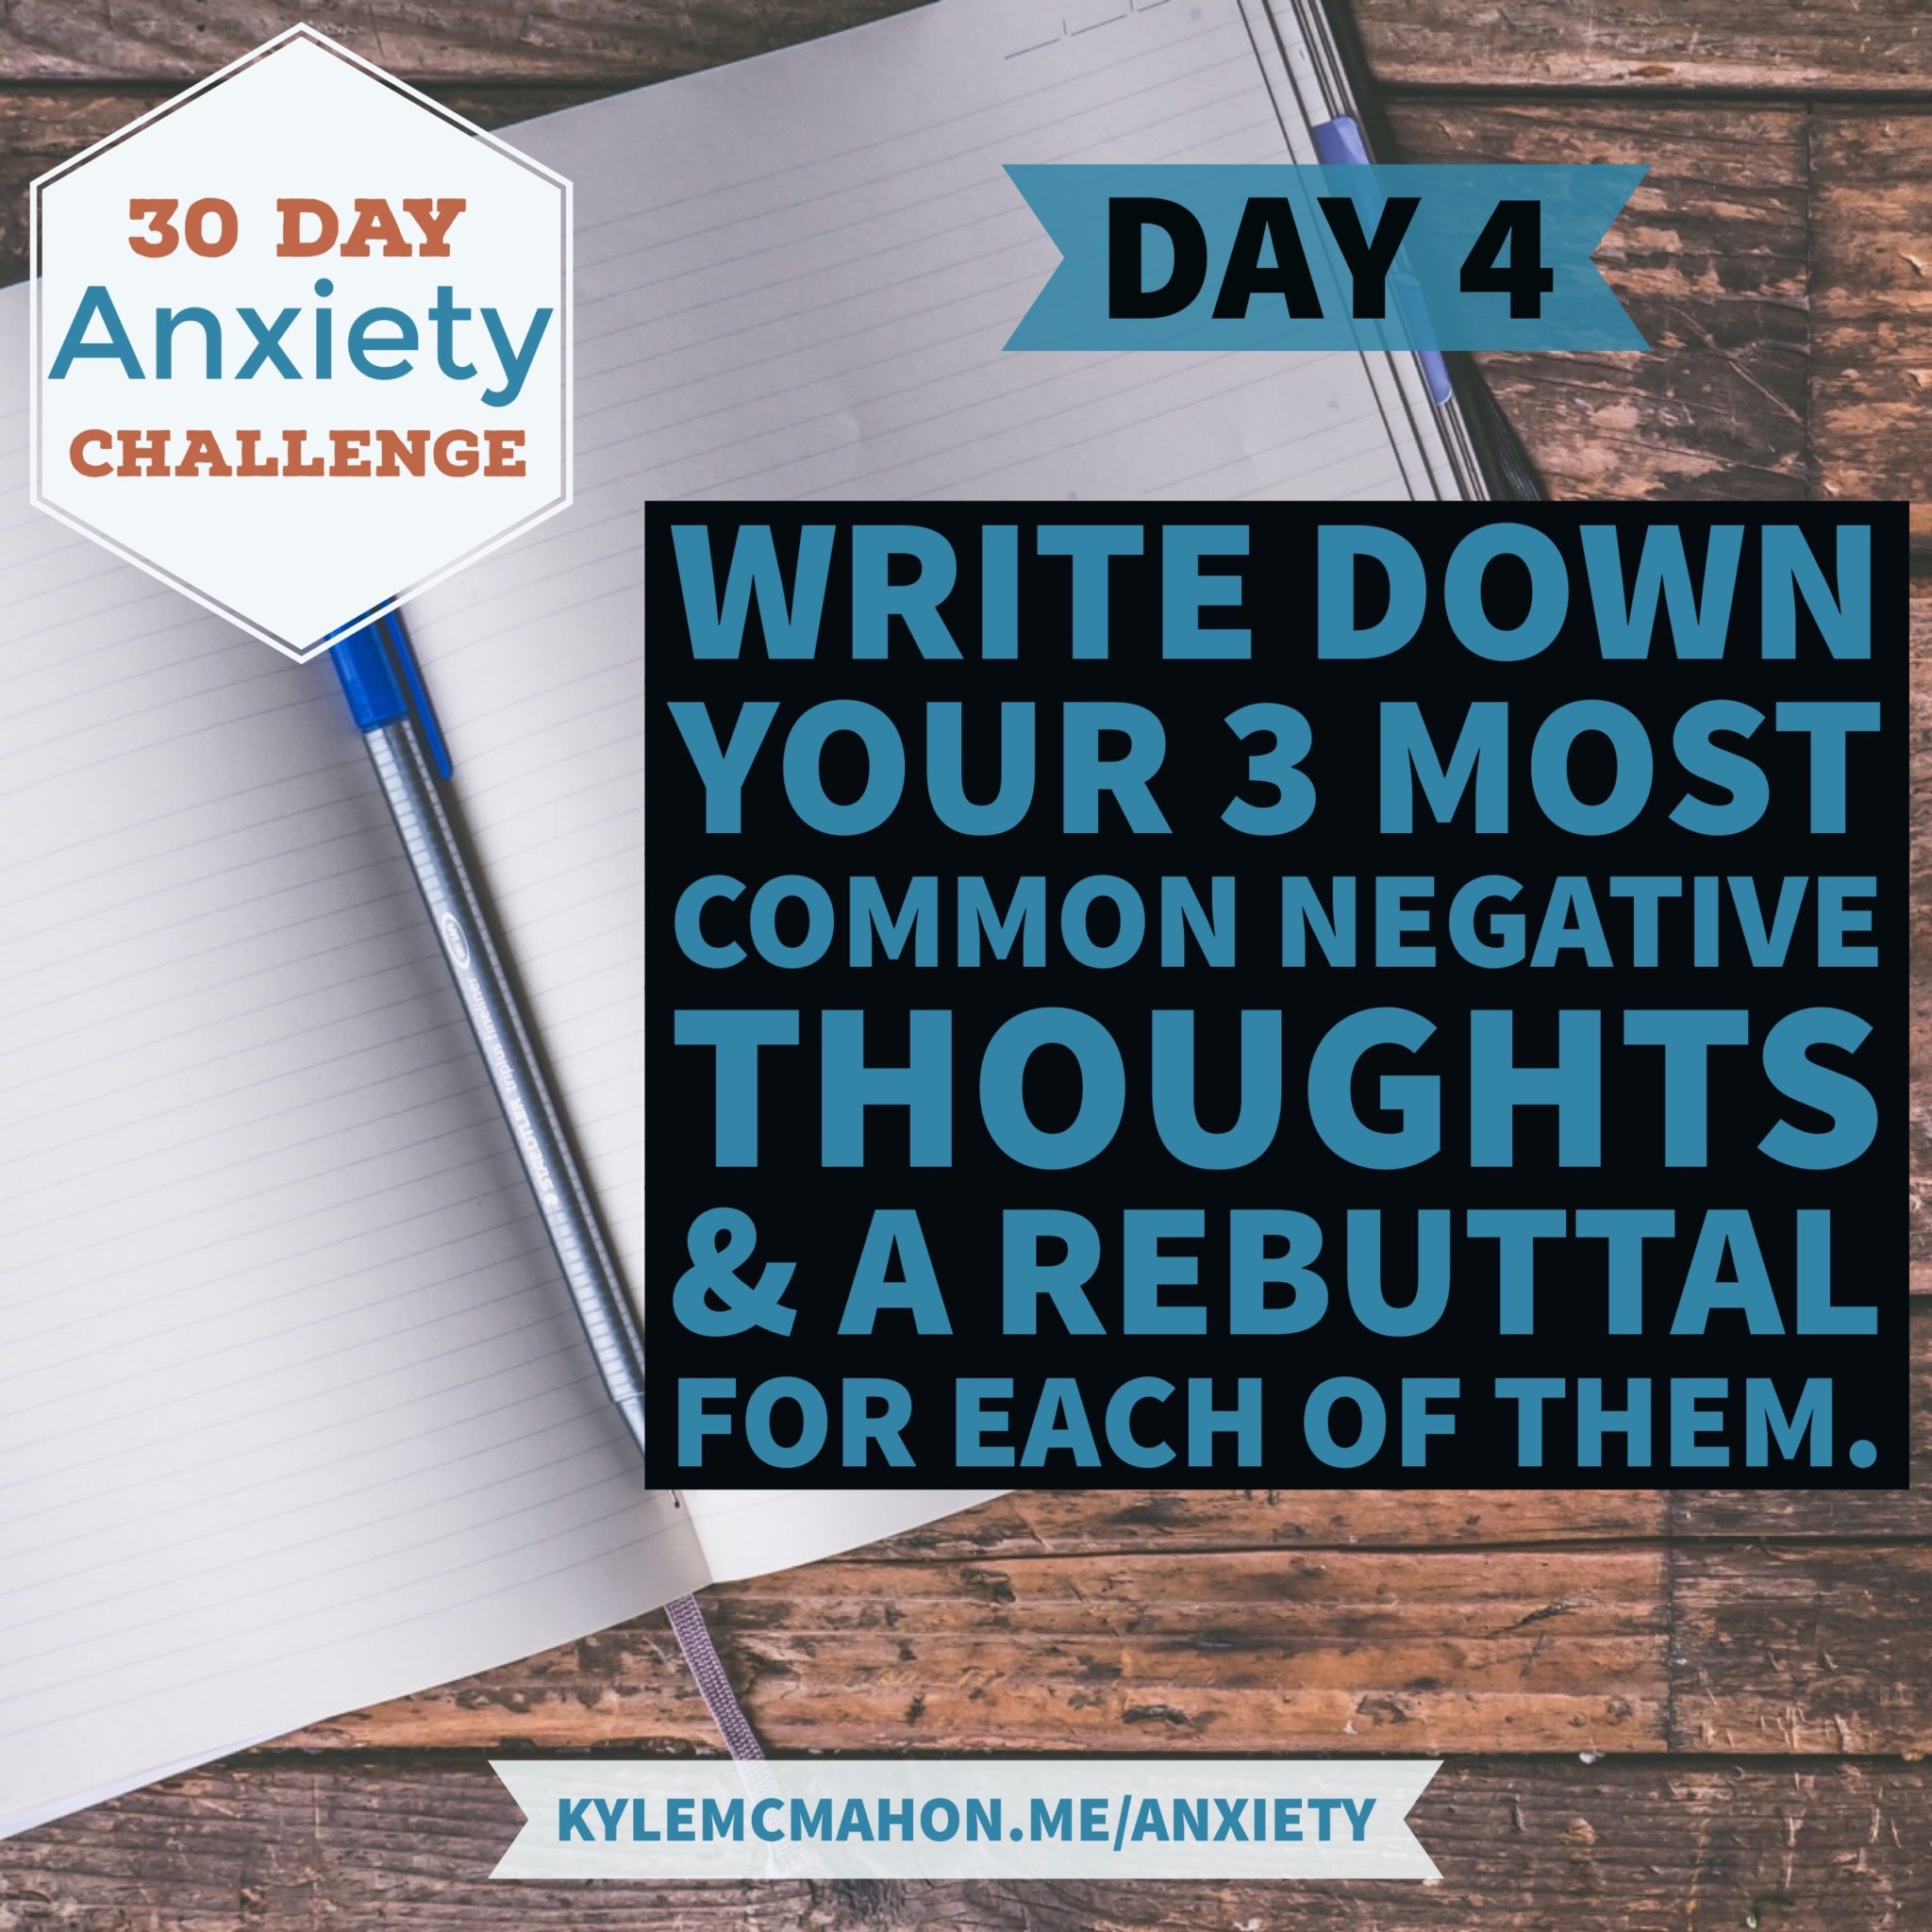 Day 4 of the 30 Day Anxiety Challenge will have you write down your 3 most common negative thoughts and a rebuttal for each one of them